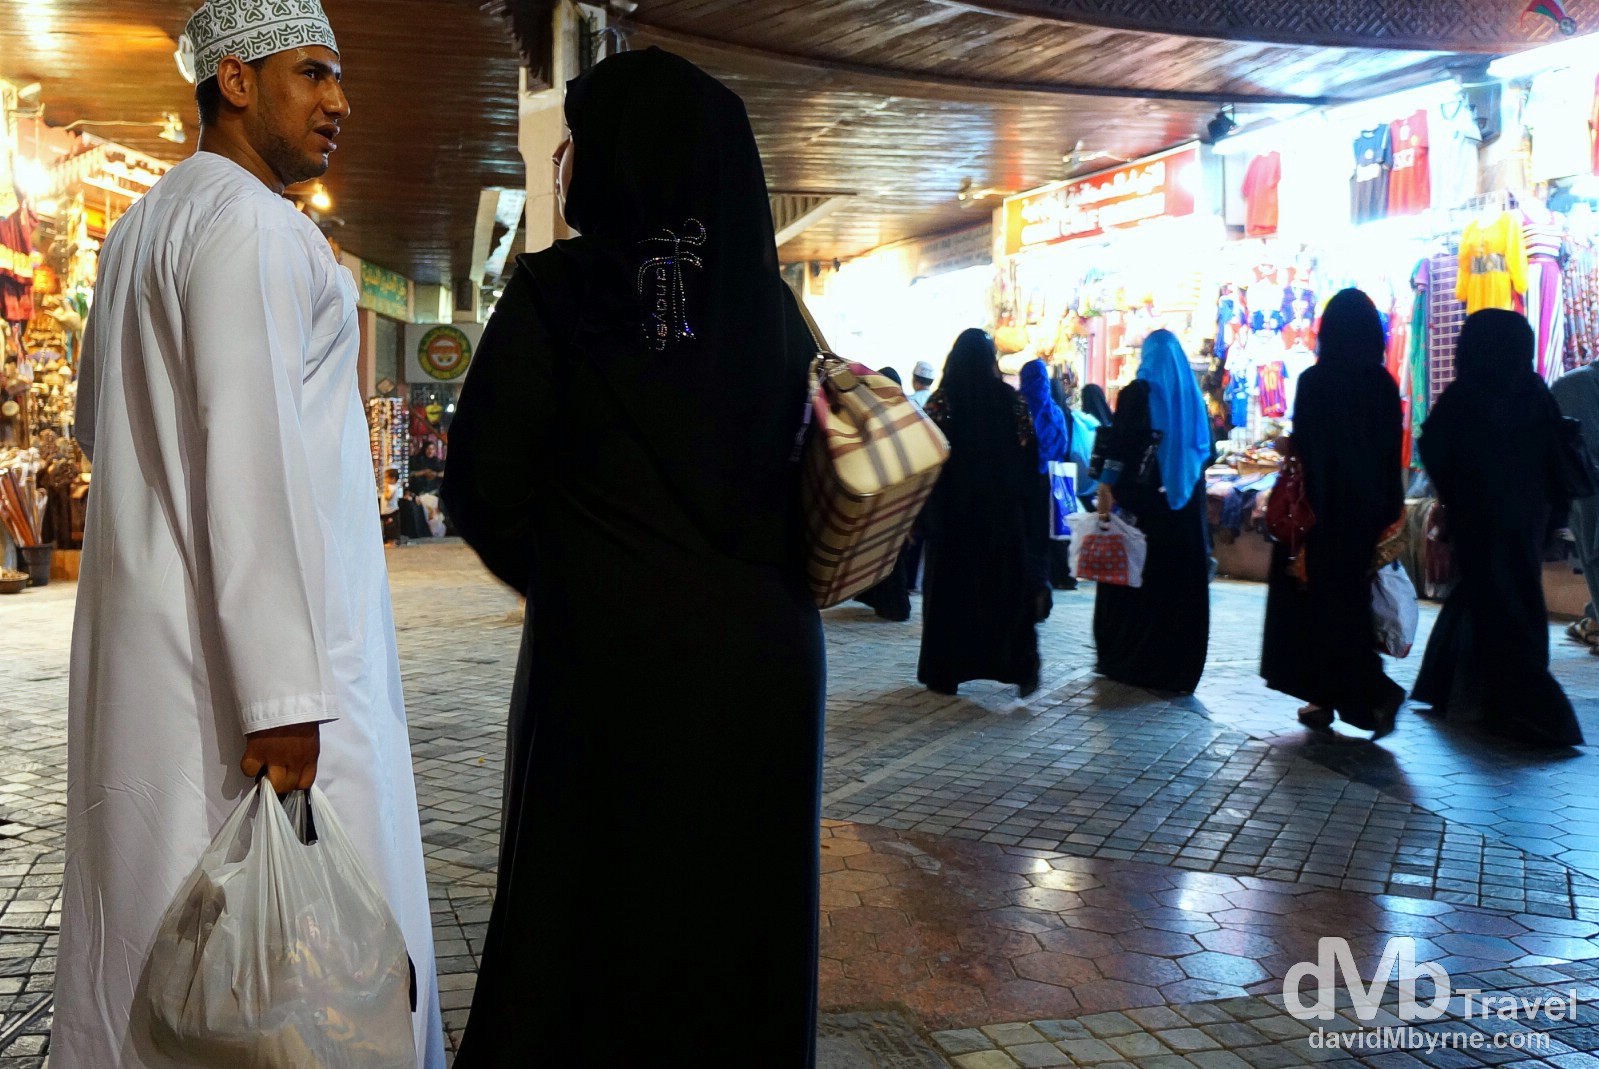 In the maze-like Mutrah Souq (marketplace) in Muscat, Oman. April 25th, 2014.